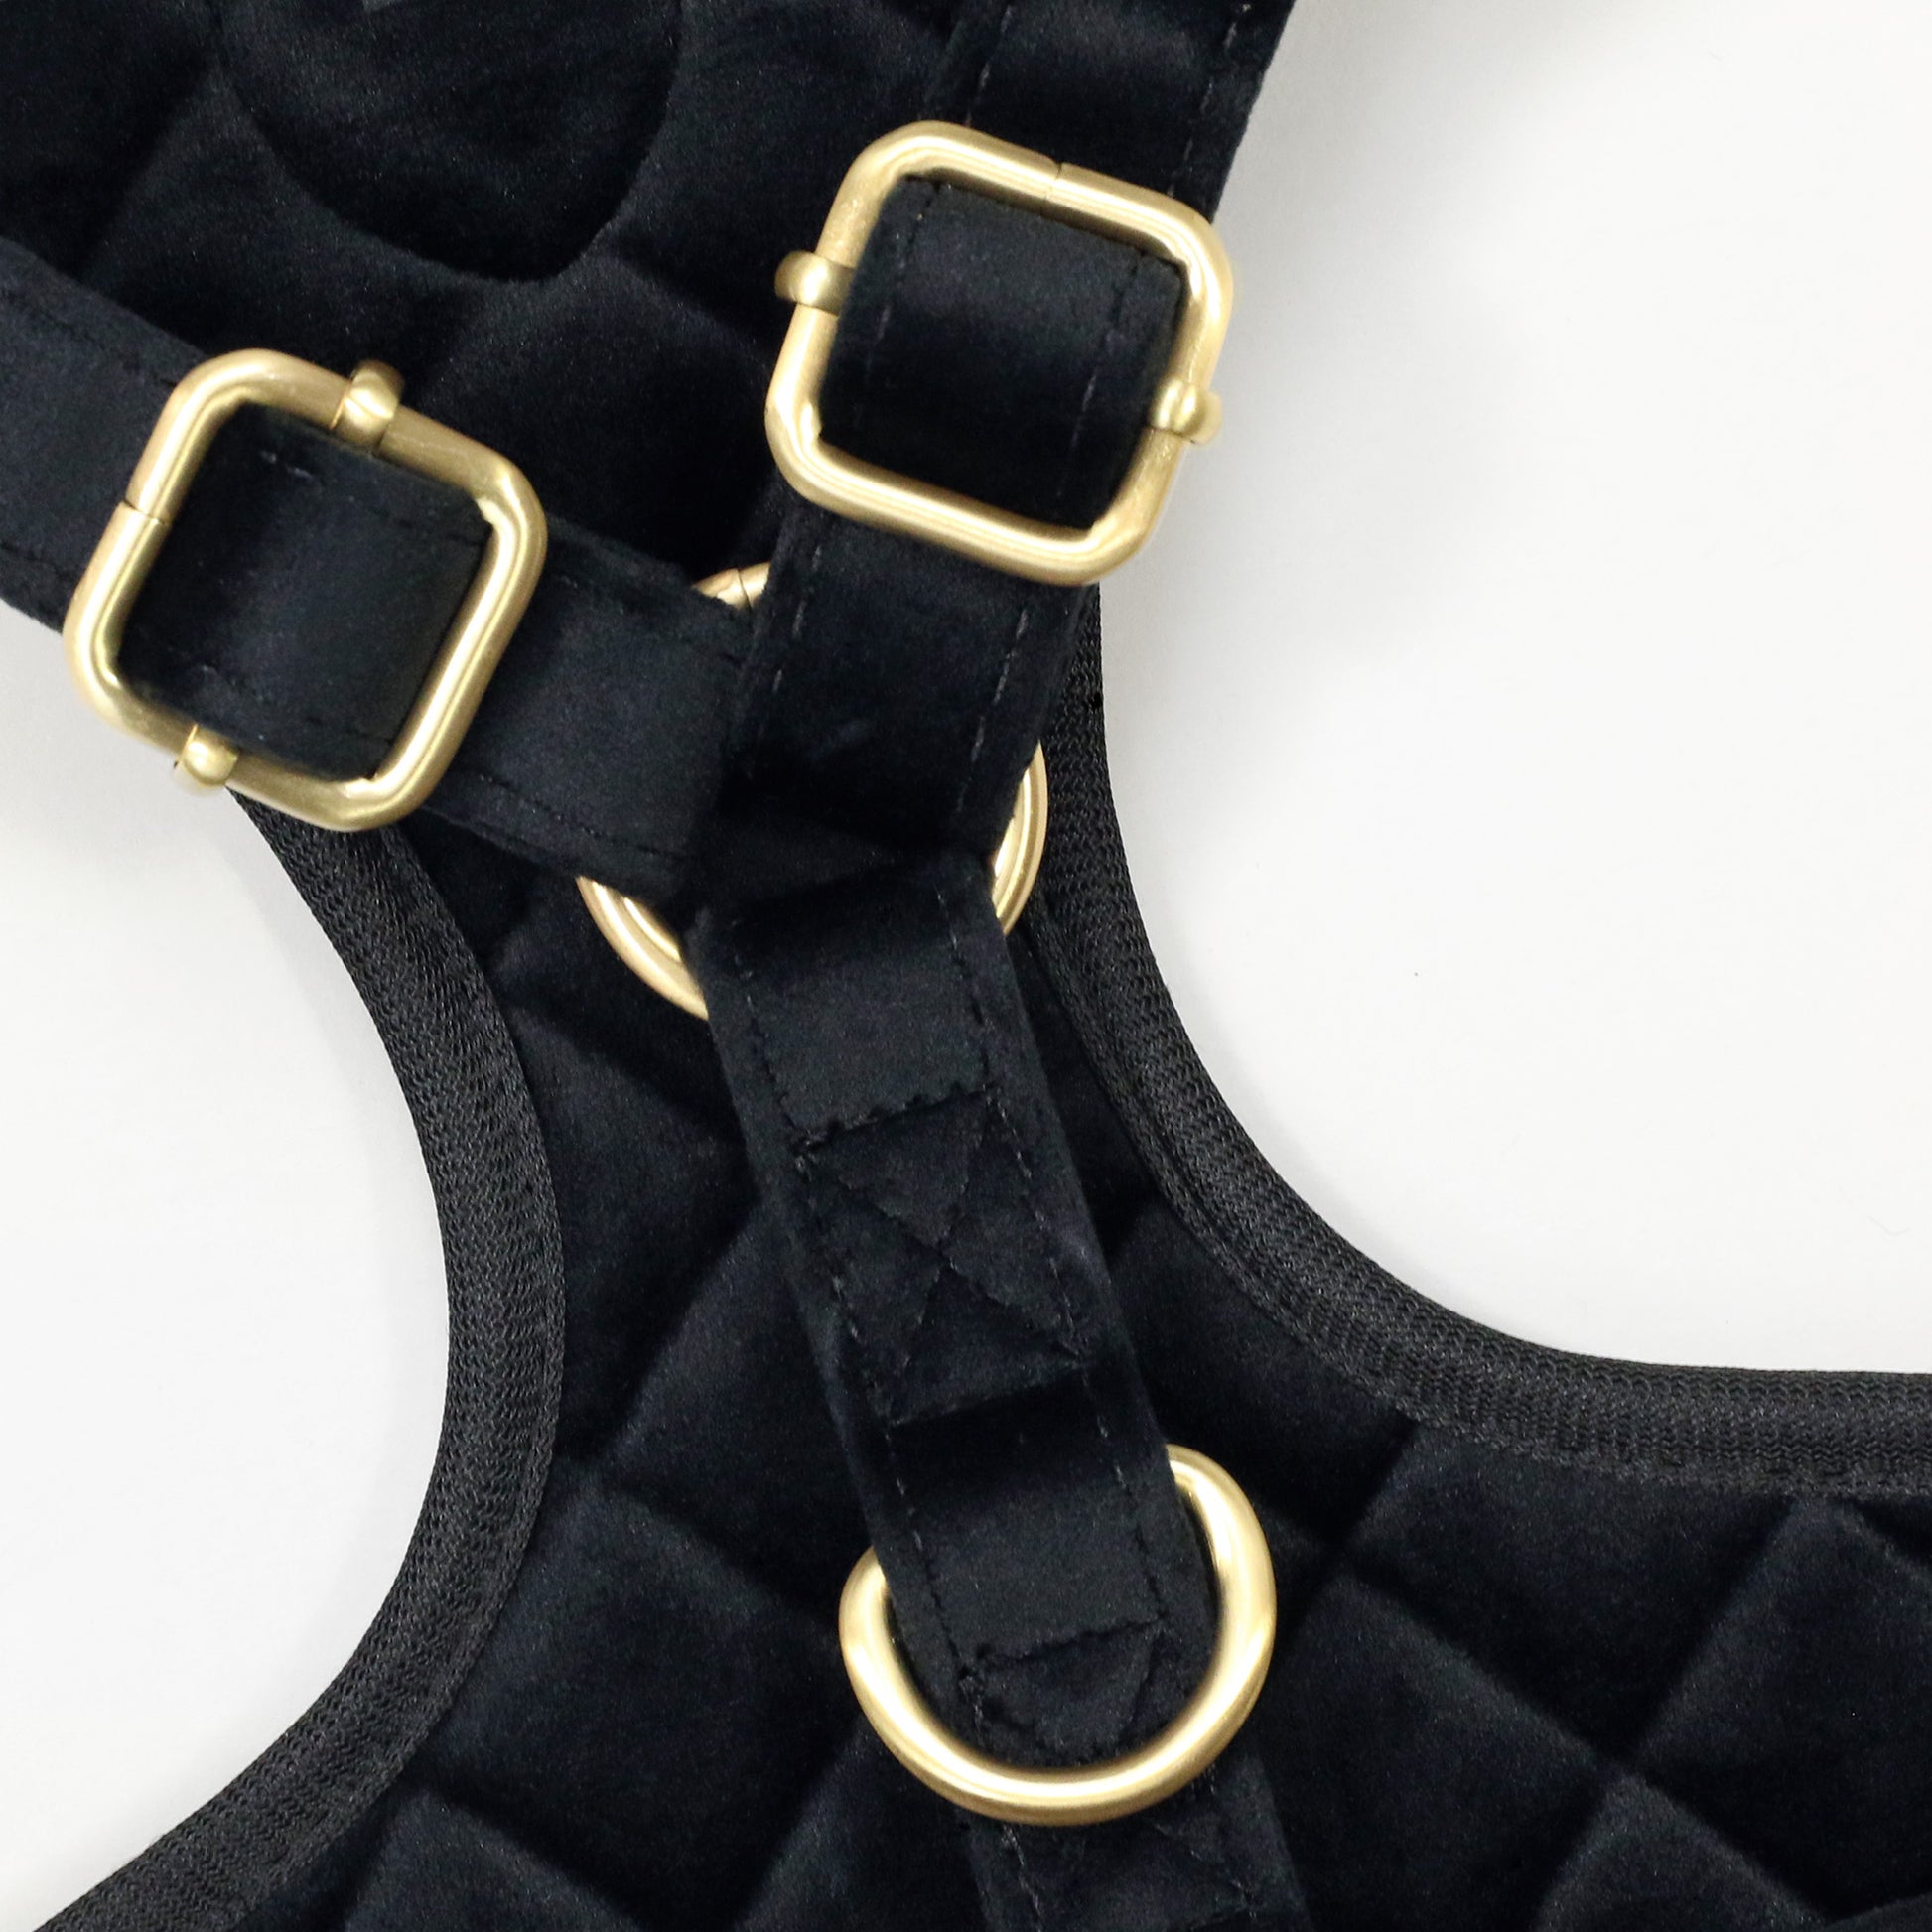 A close up detail image showing the hardware on the Deluxe Quilted Pet Harness.